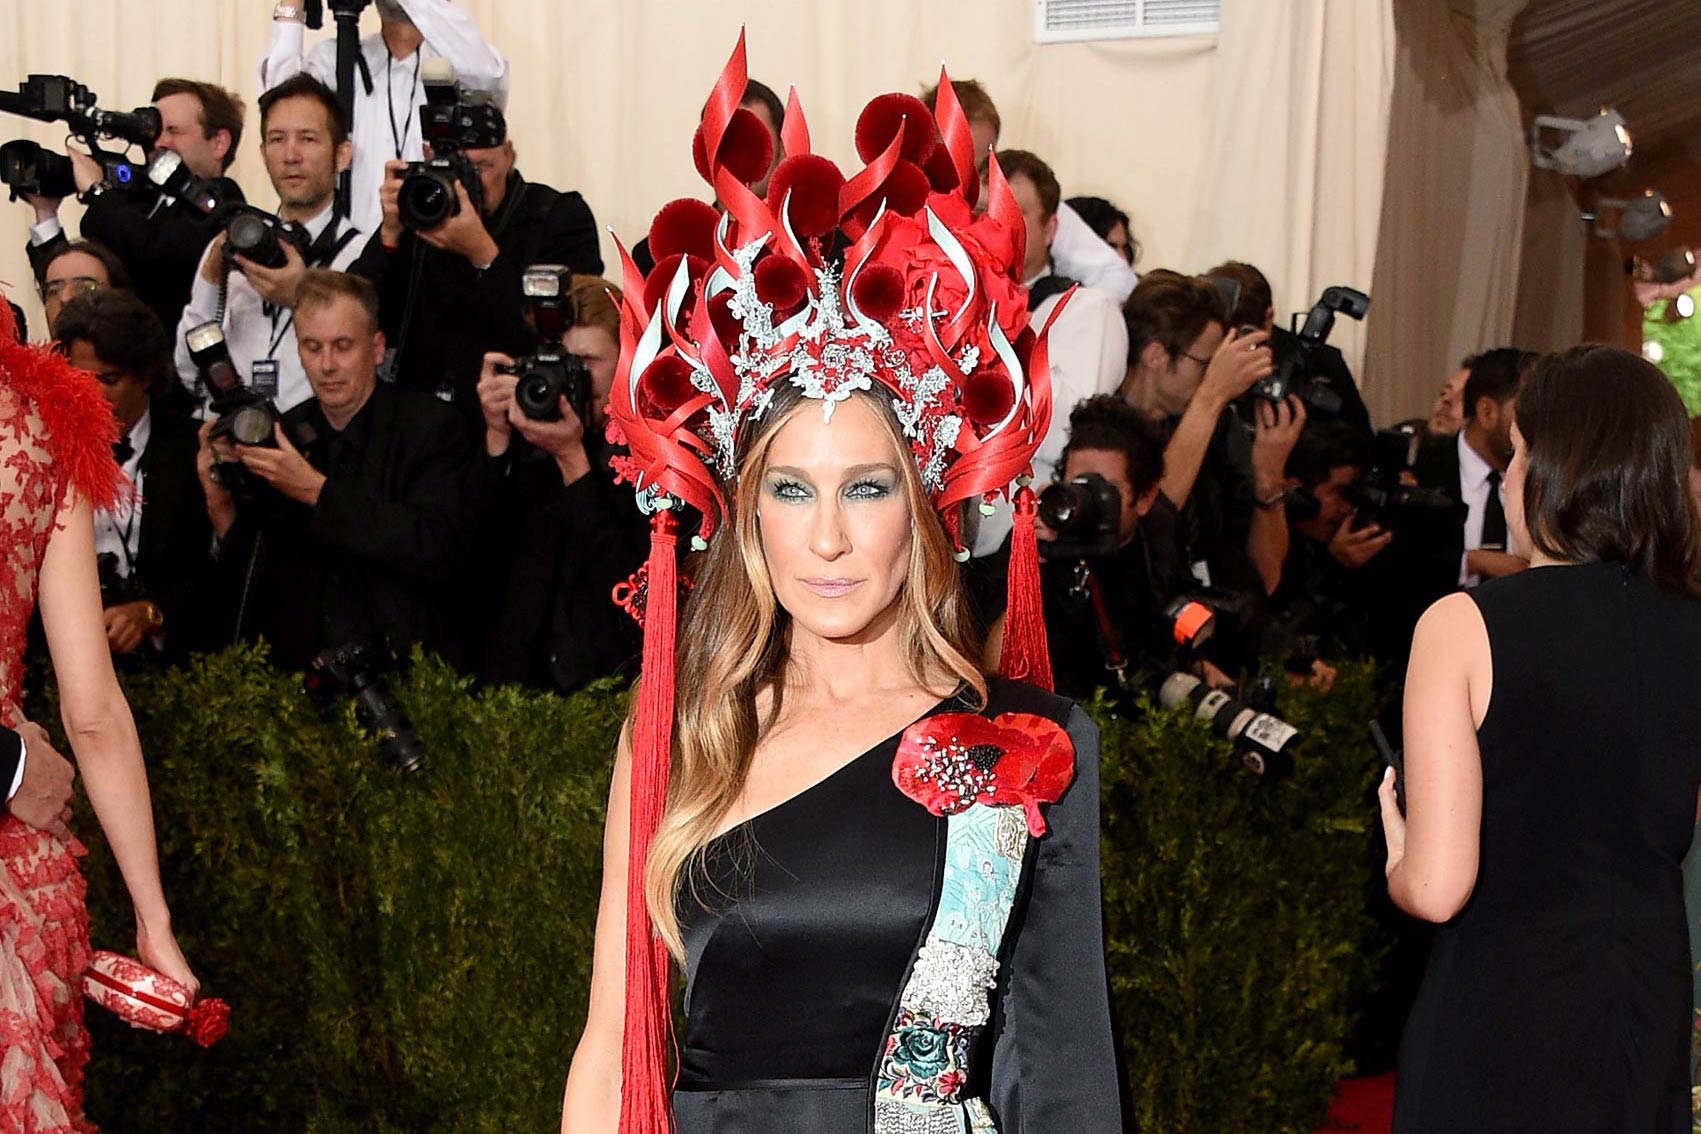 Sarah Jessica Parker attends the "China: Through The Looking Glass" Costume Institute Benefit Gala at the Metropolitan Museum of Art on May 4, 2015 in New York. (Larry Busacca—Getty Images)